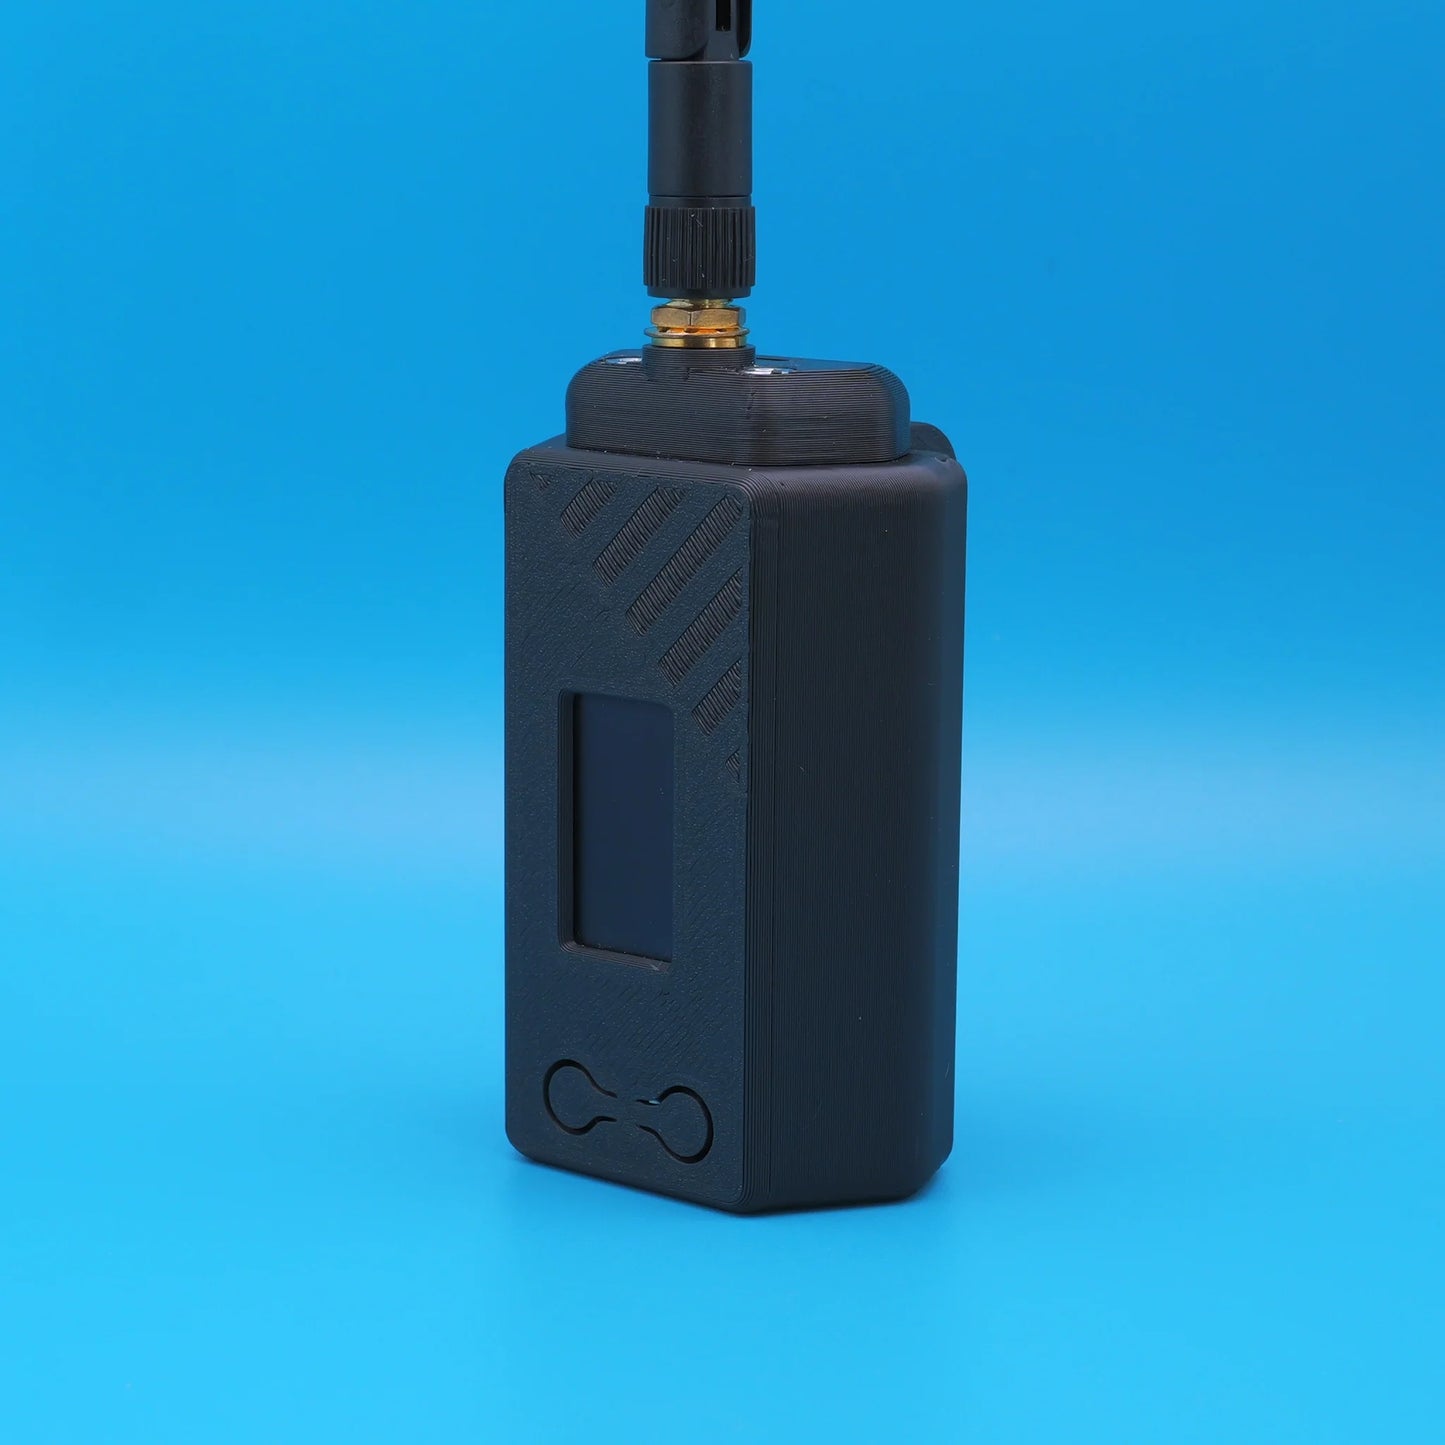 Nibbler Plus - Tiny Meshtastic Powered Portable Node case with SMA Connector